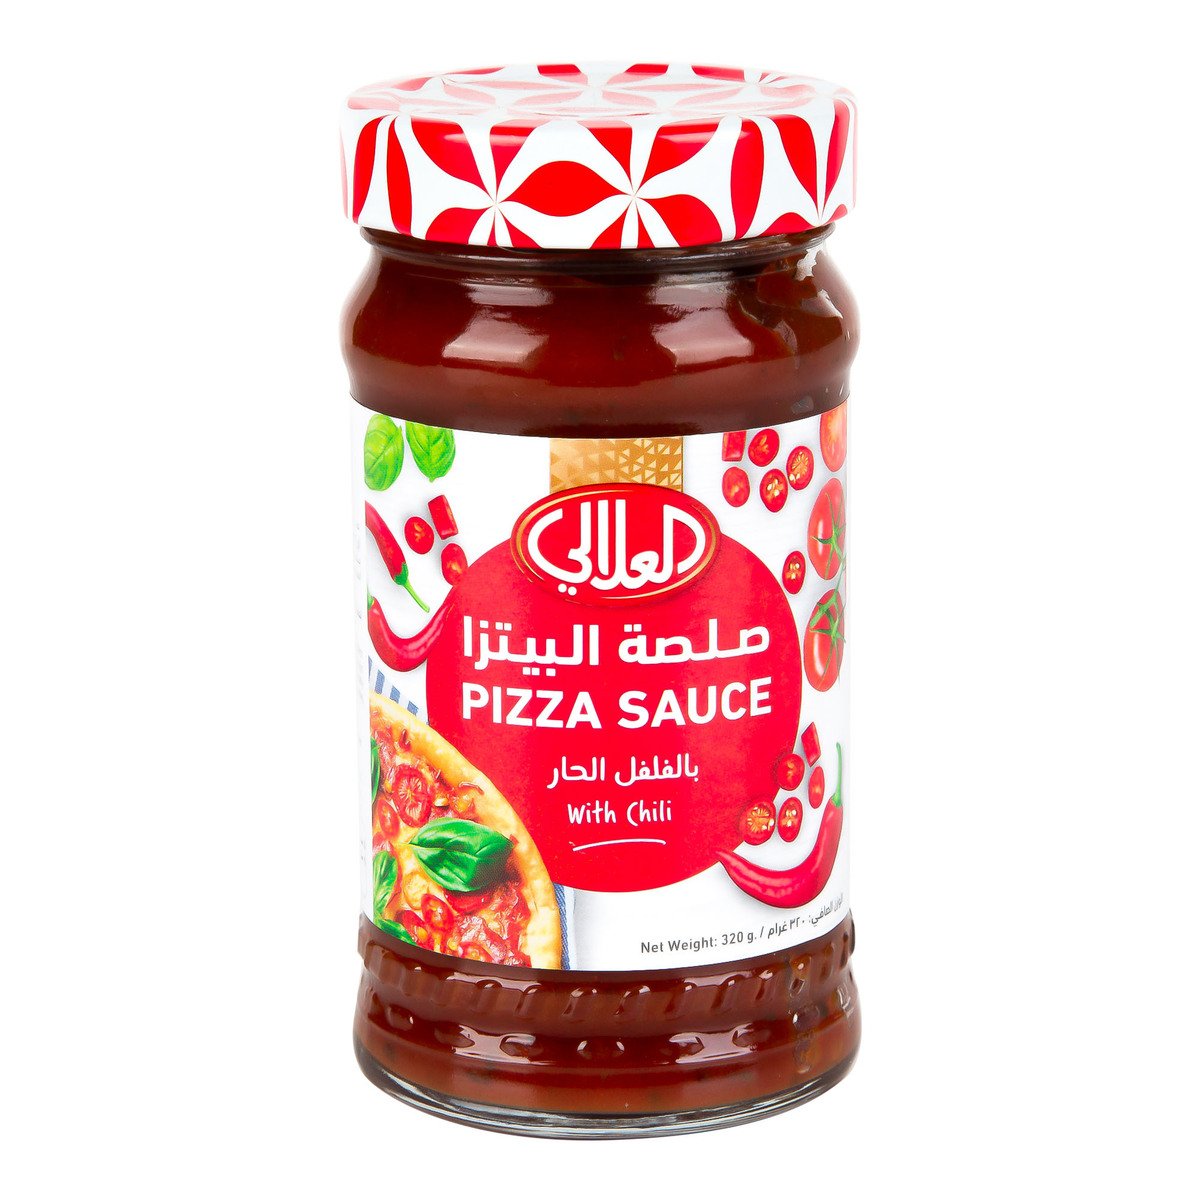 Buy Al Alali Pizza Sauce With Chilli 320 g Online at Best Price | Cooking Sauce | Lulu Kuwait in Saudi Arabia